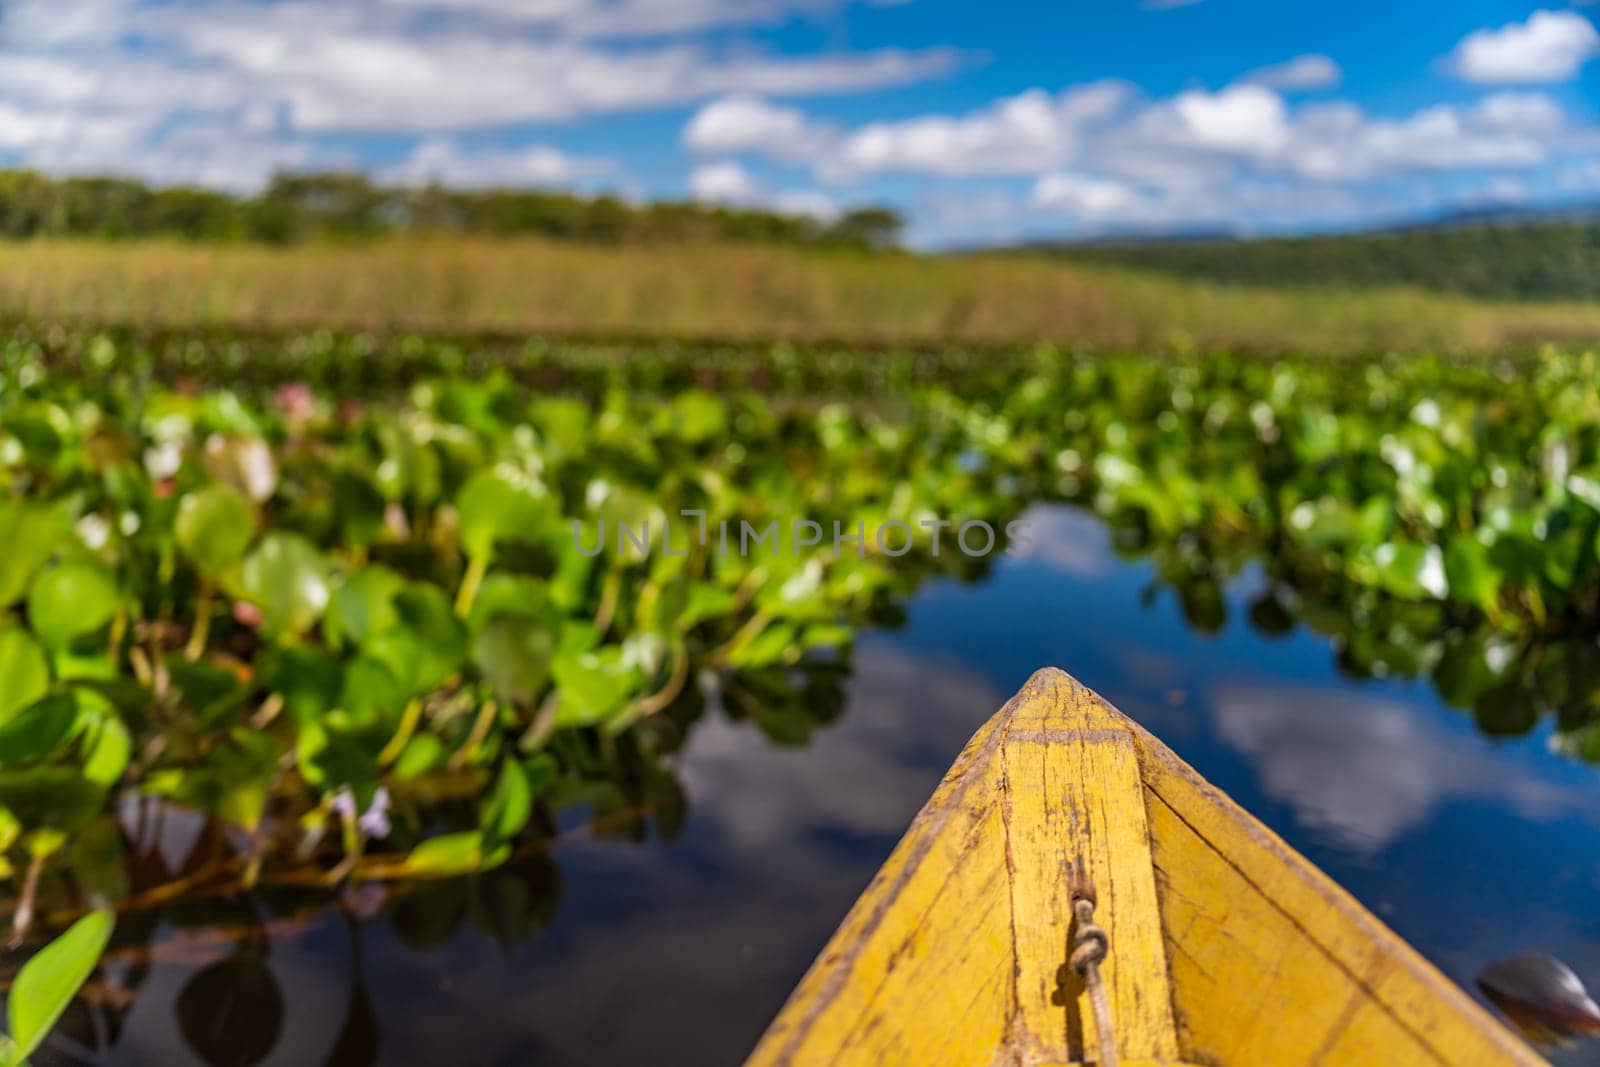 Boat journey through serene water hyacinths under a clear sky, invoking peacefulness and adventure.